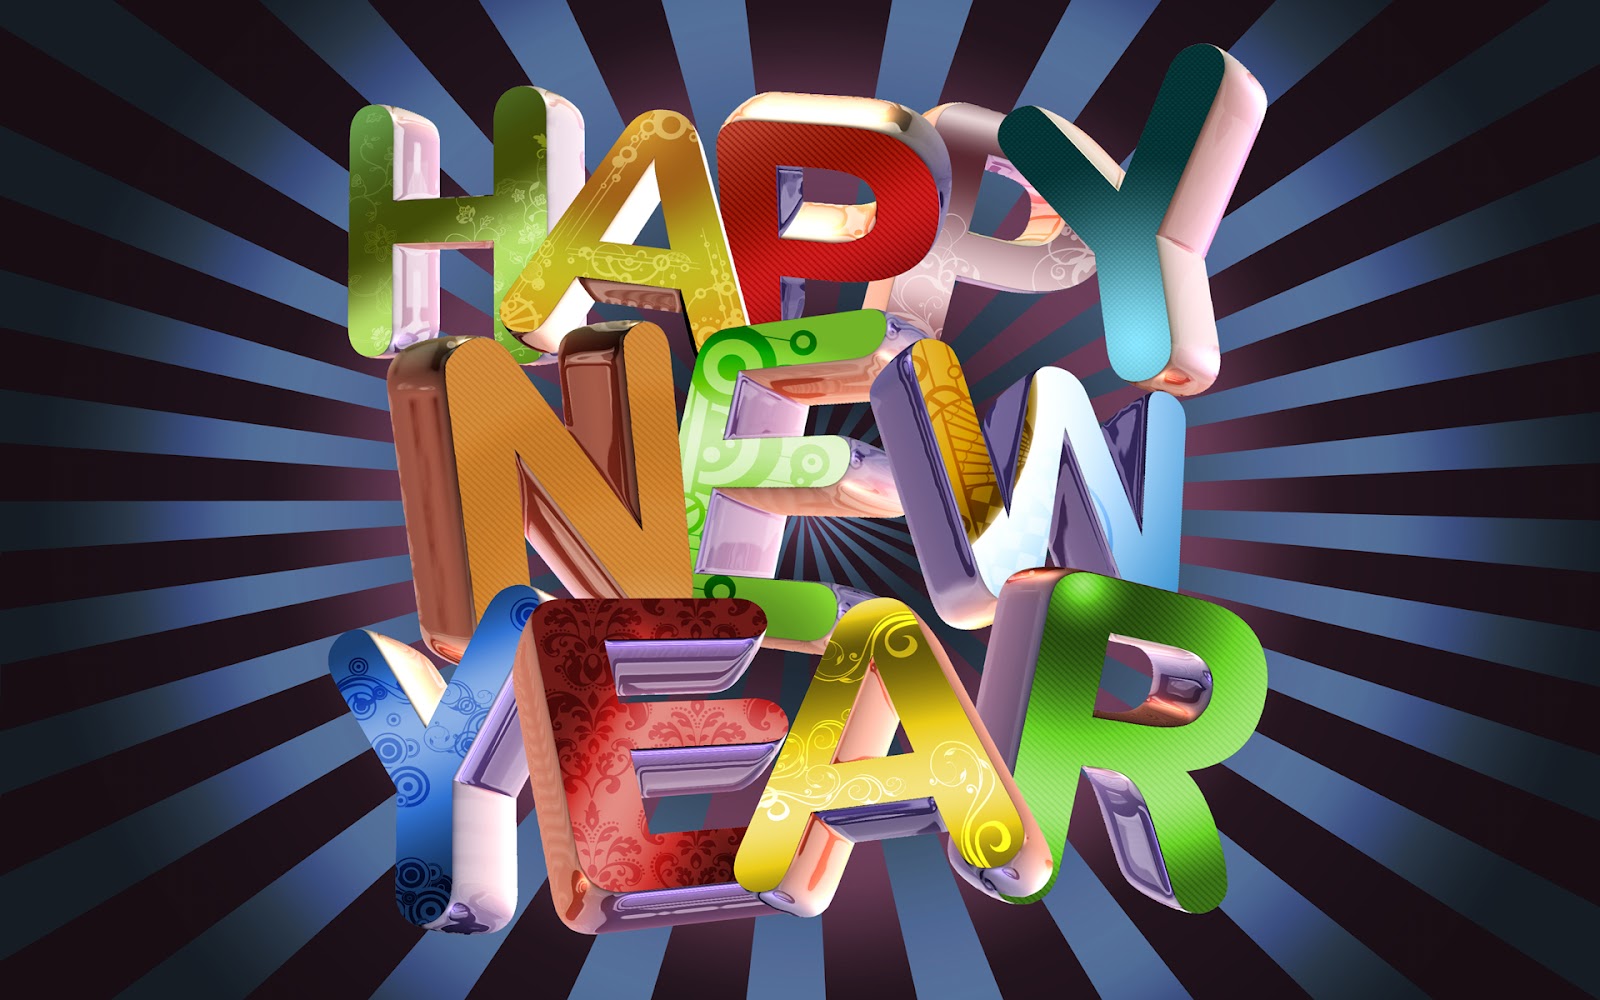 New Year 2014 Wallpapers: 2014 New Year Desktop Wallpapers for Free ...